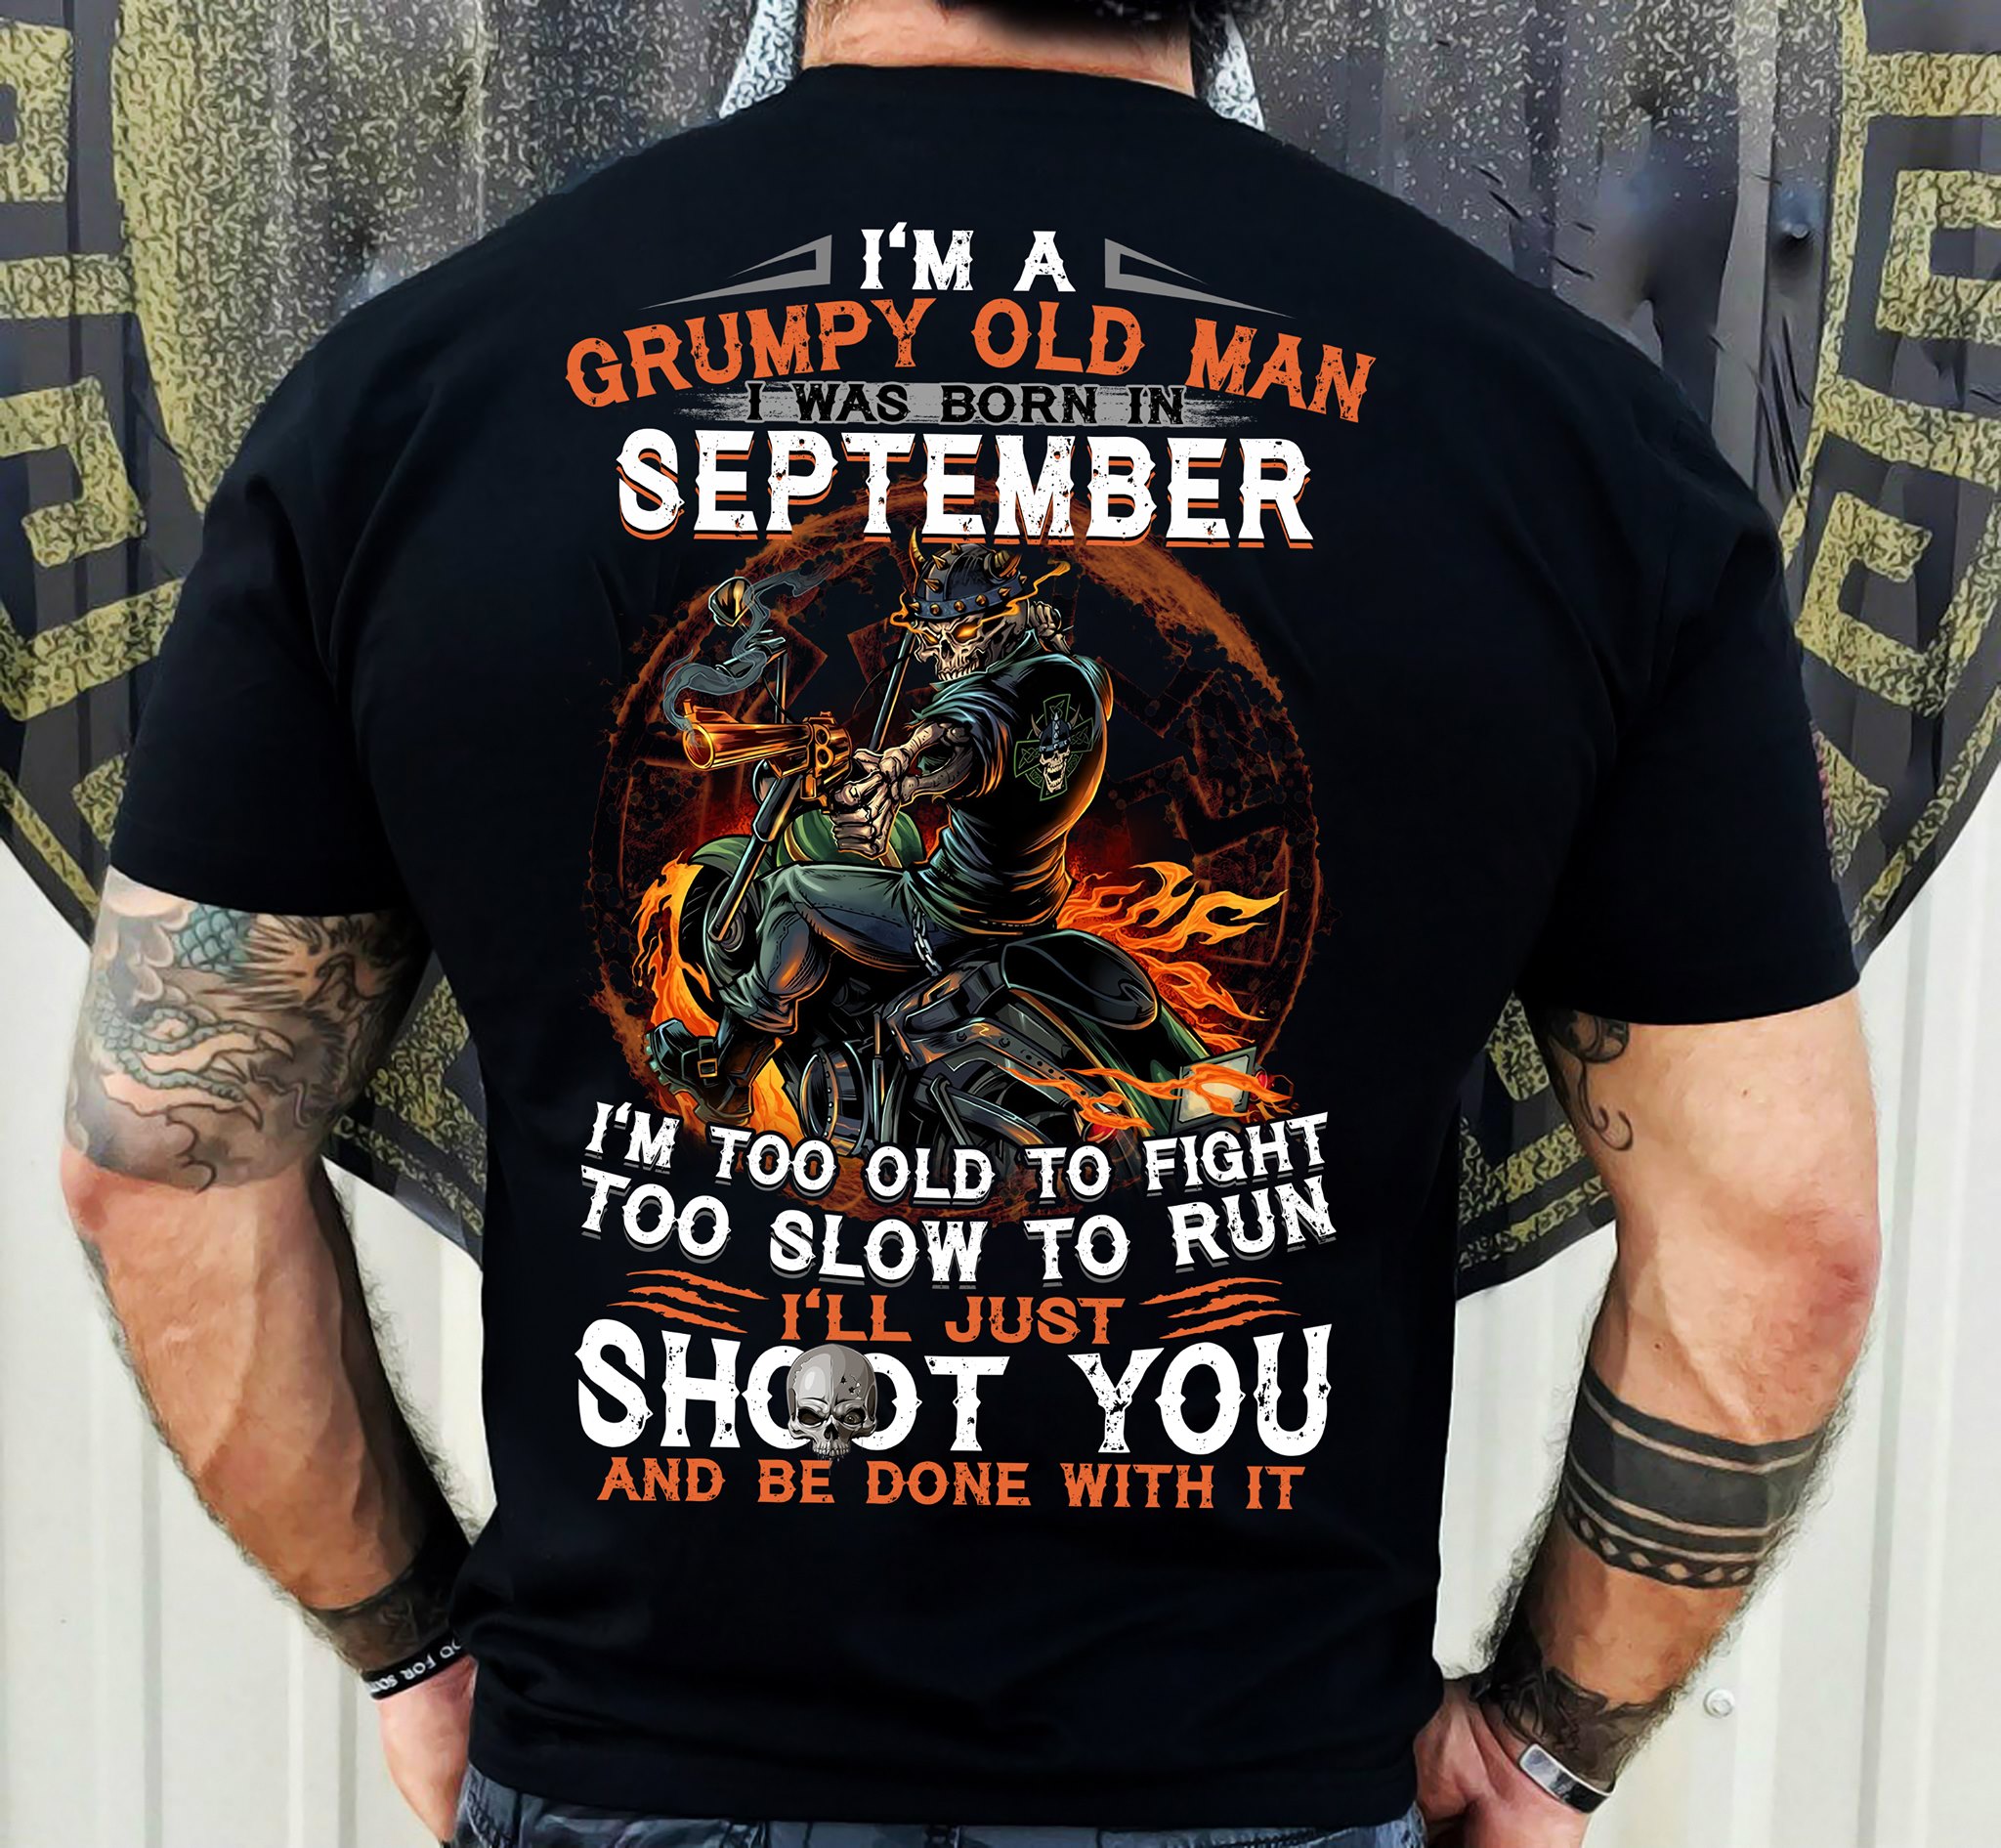 Im a grumpy old man I was born in september. Im too old to fight too fight too slow to run ill just shoot you and be done with it